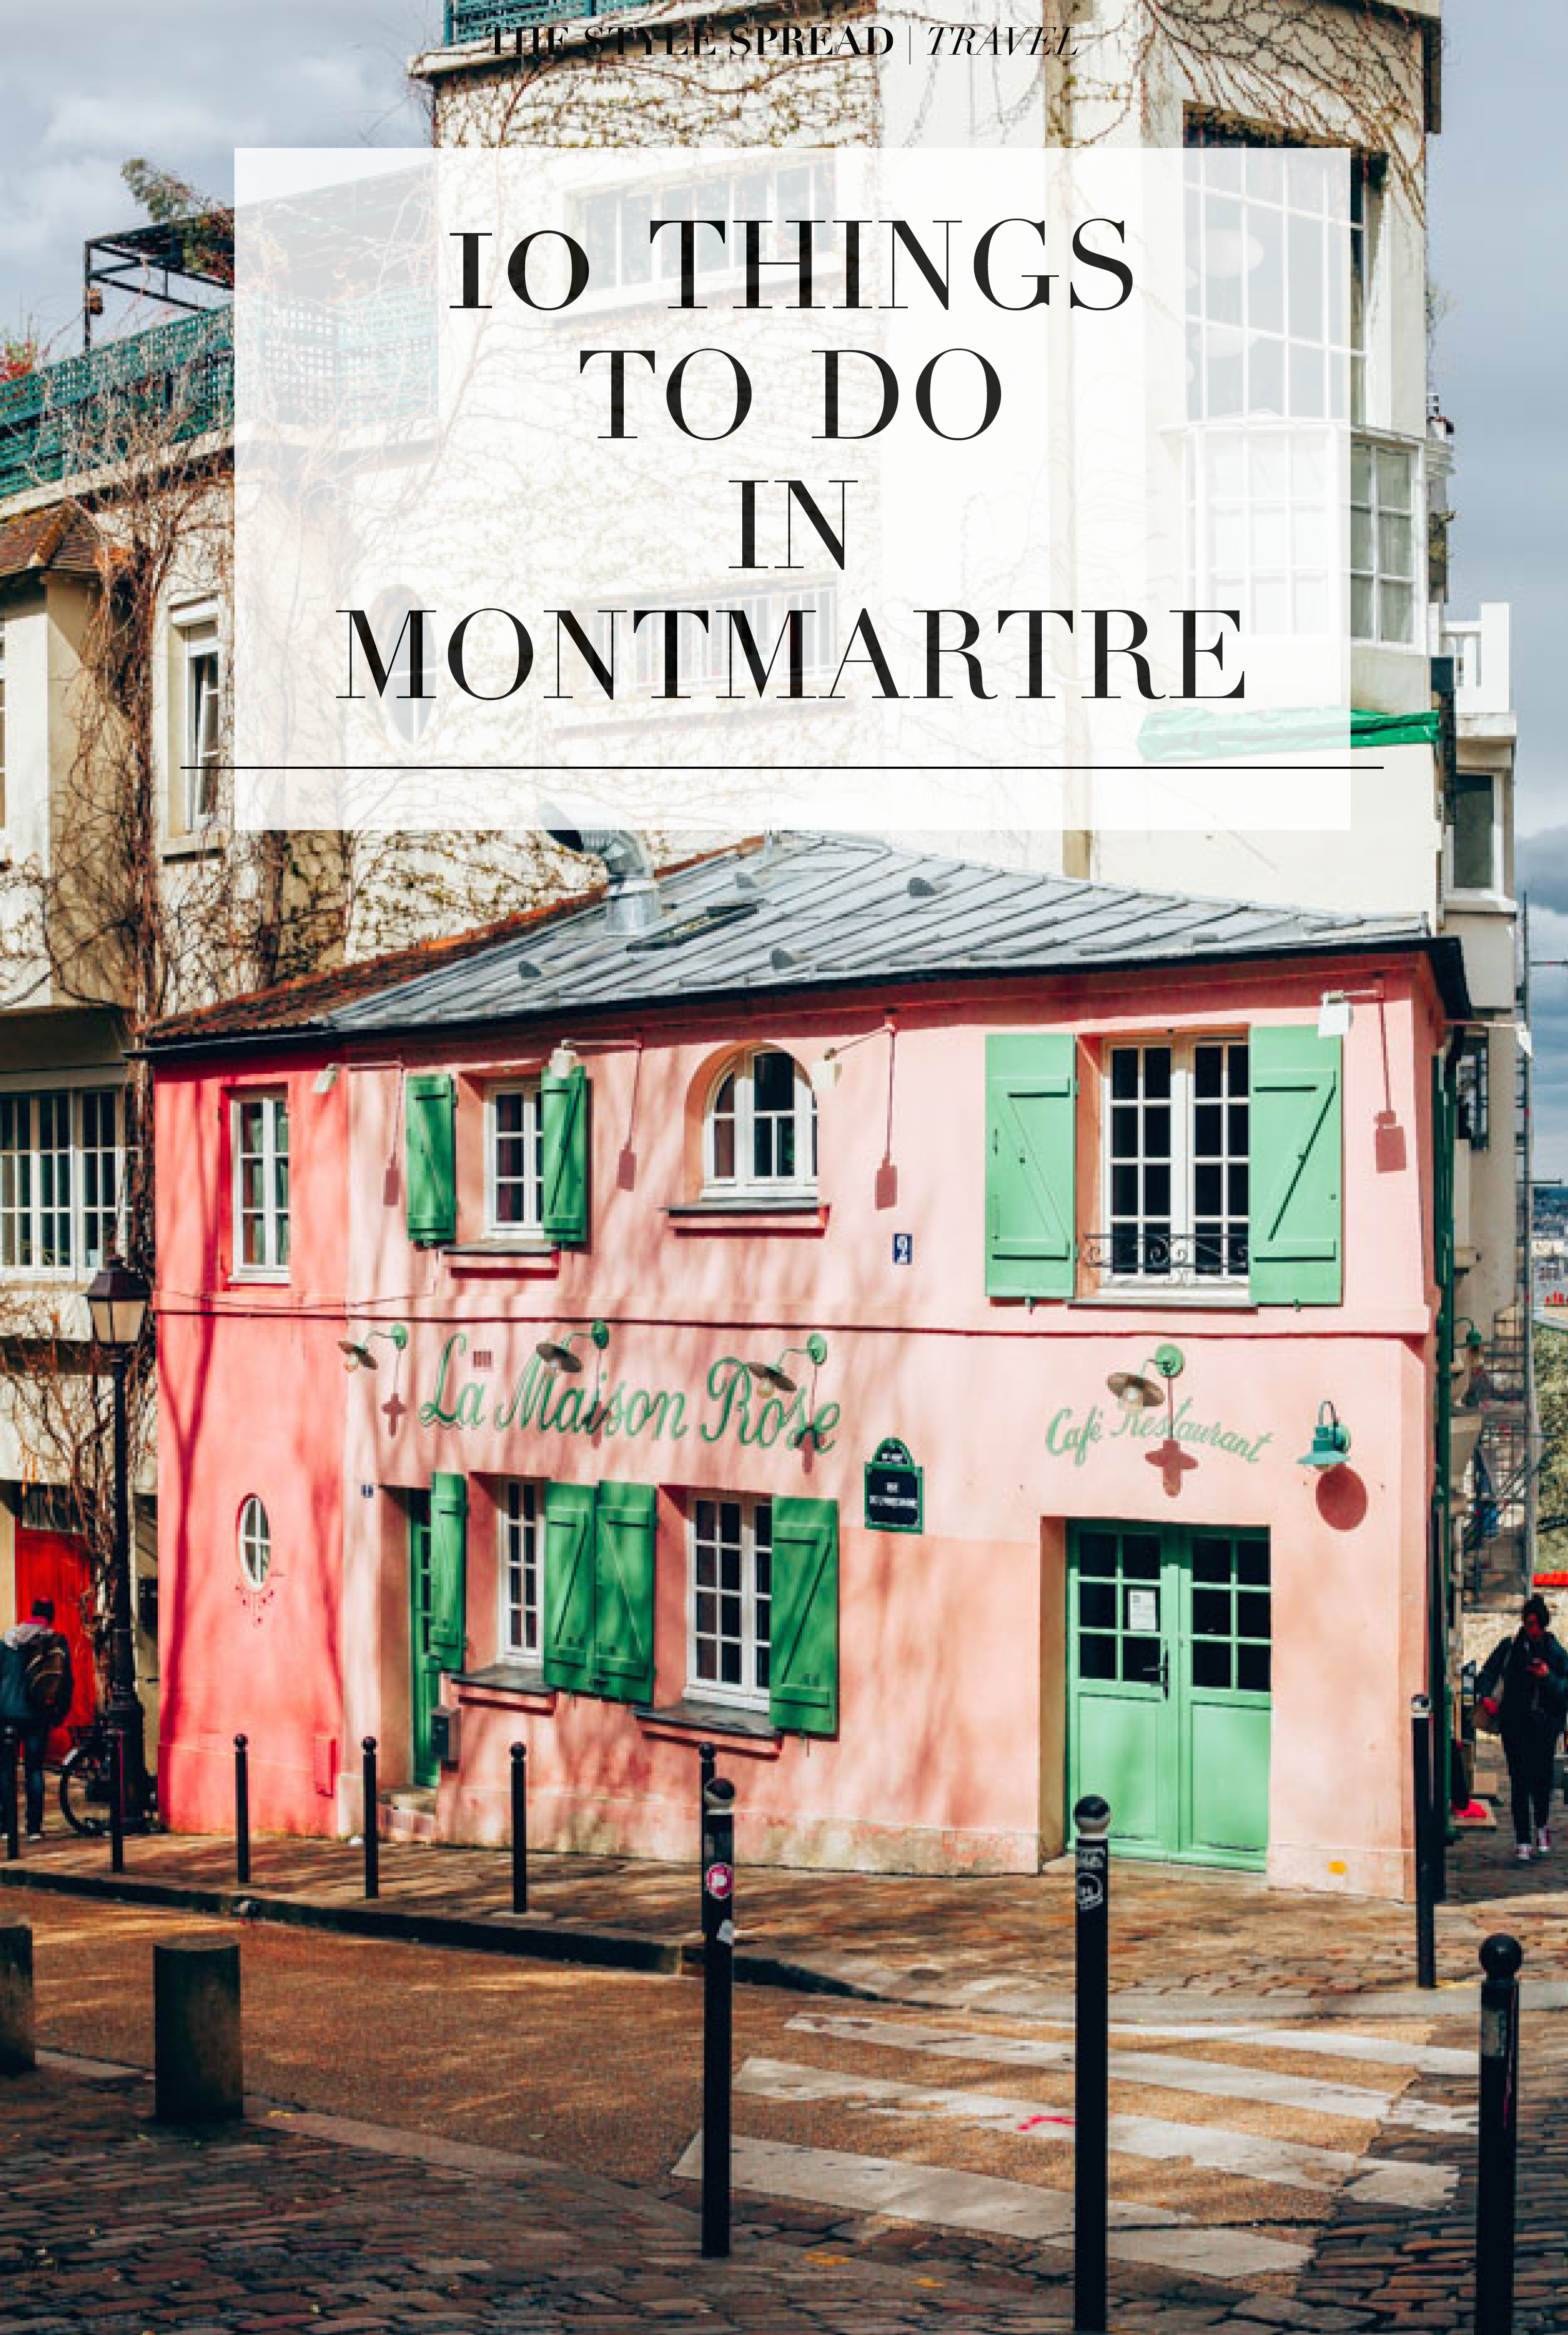 10 things to do in Montmartre